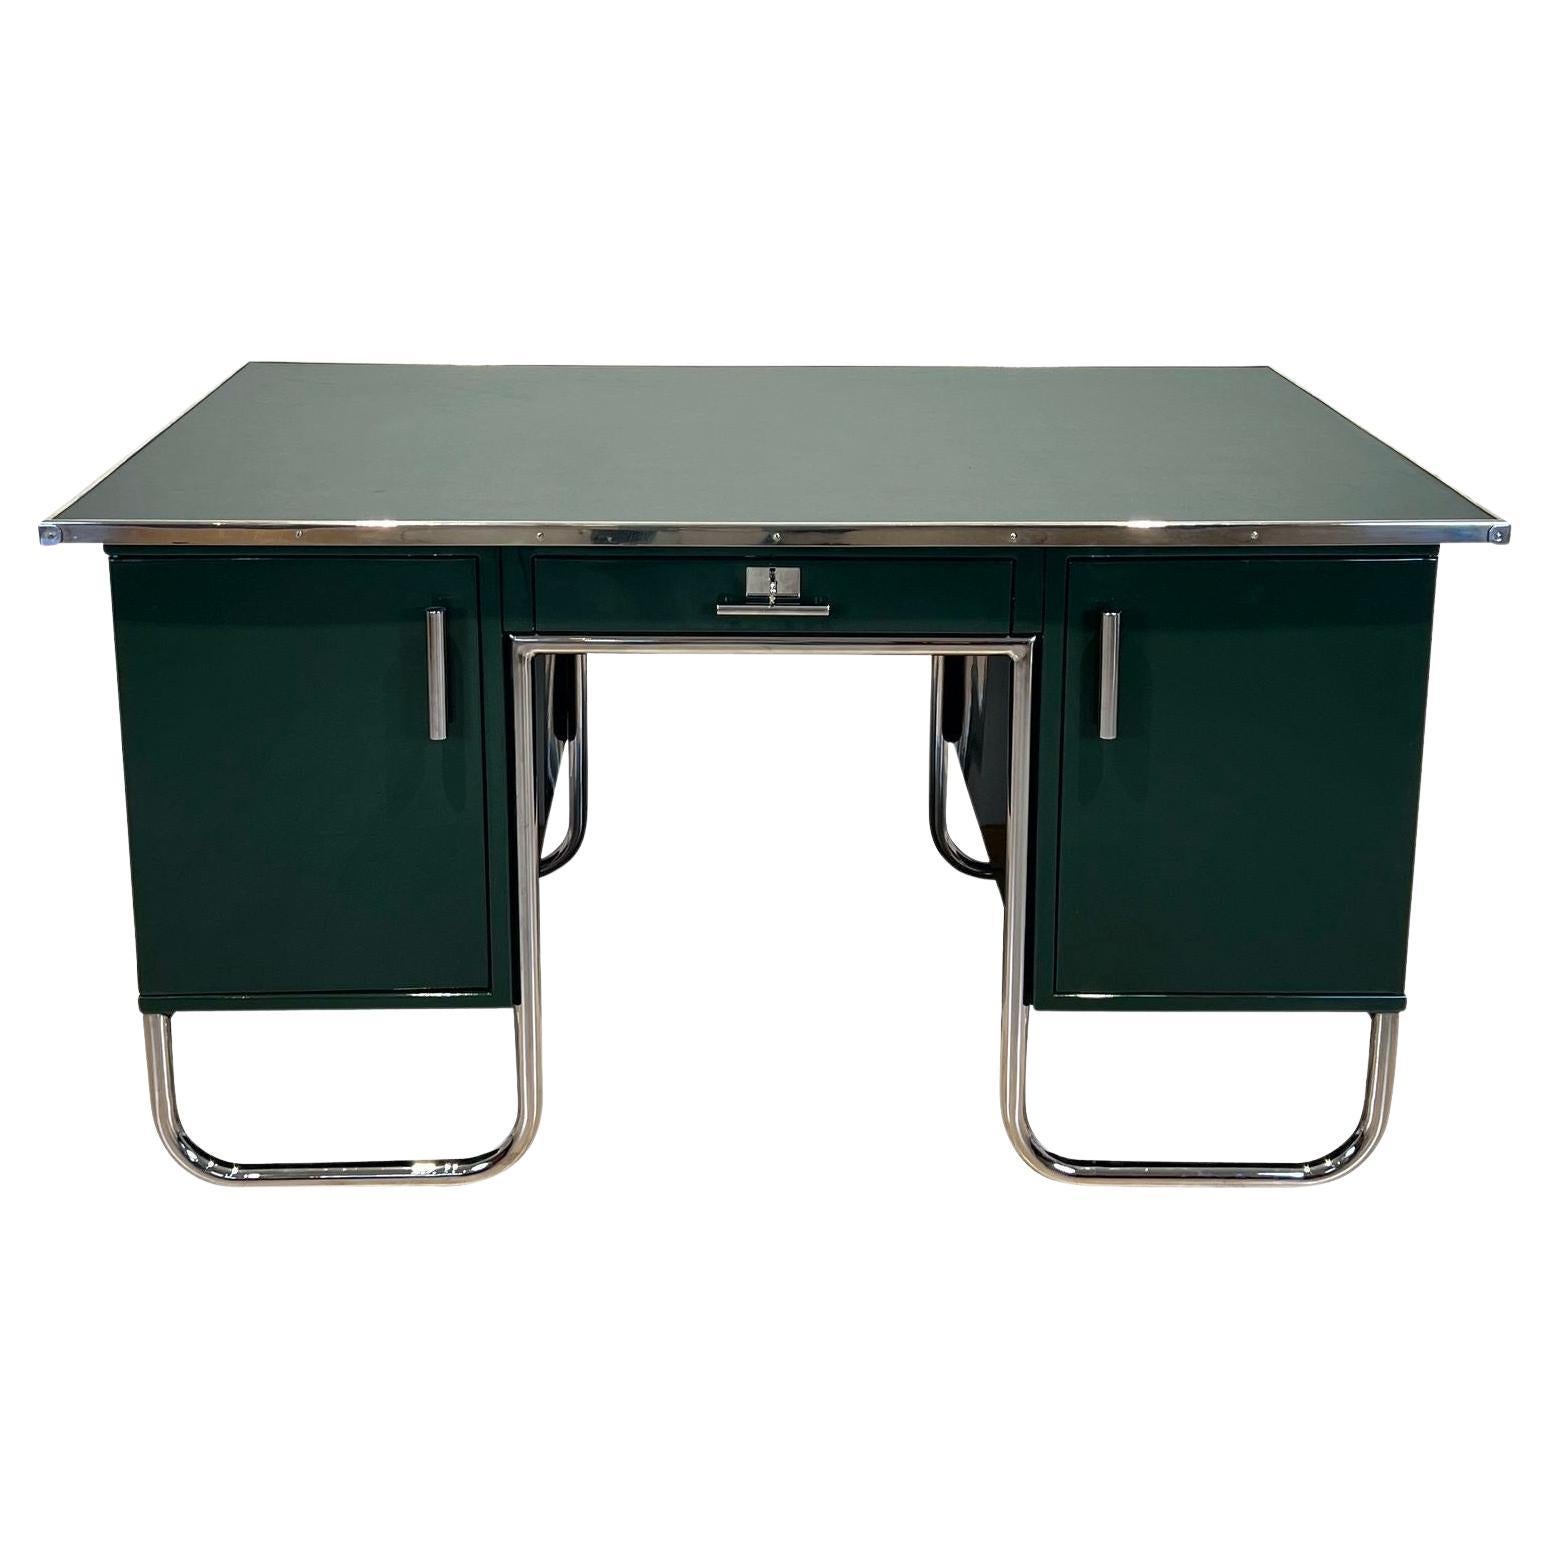 Bauhaus Partners Desk, Green Lacquered Metal and Chrome, Germany circa 1930 For Sale